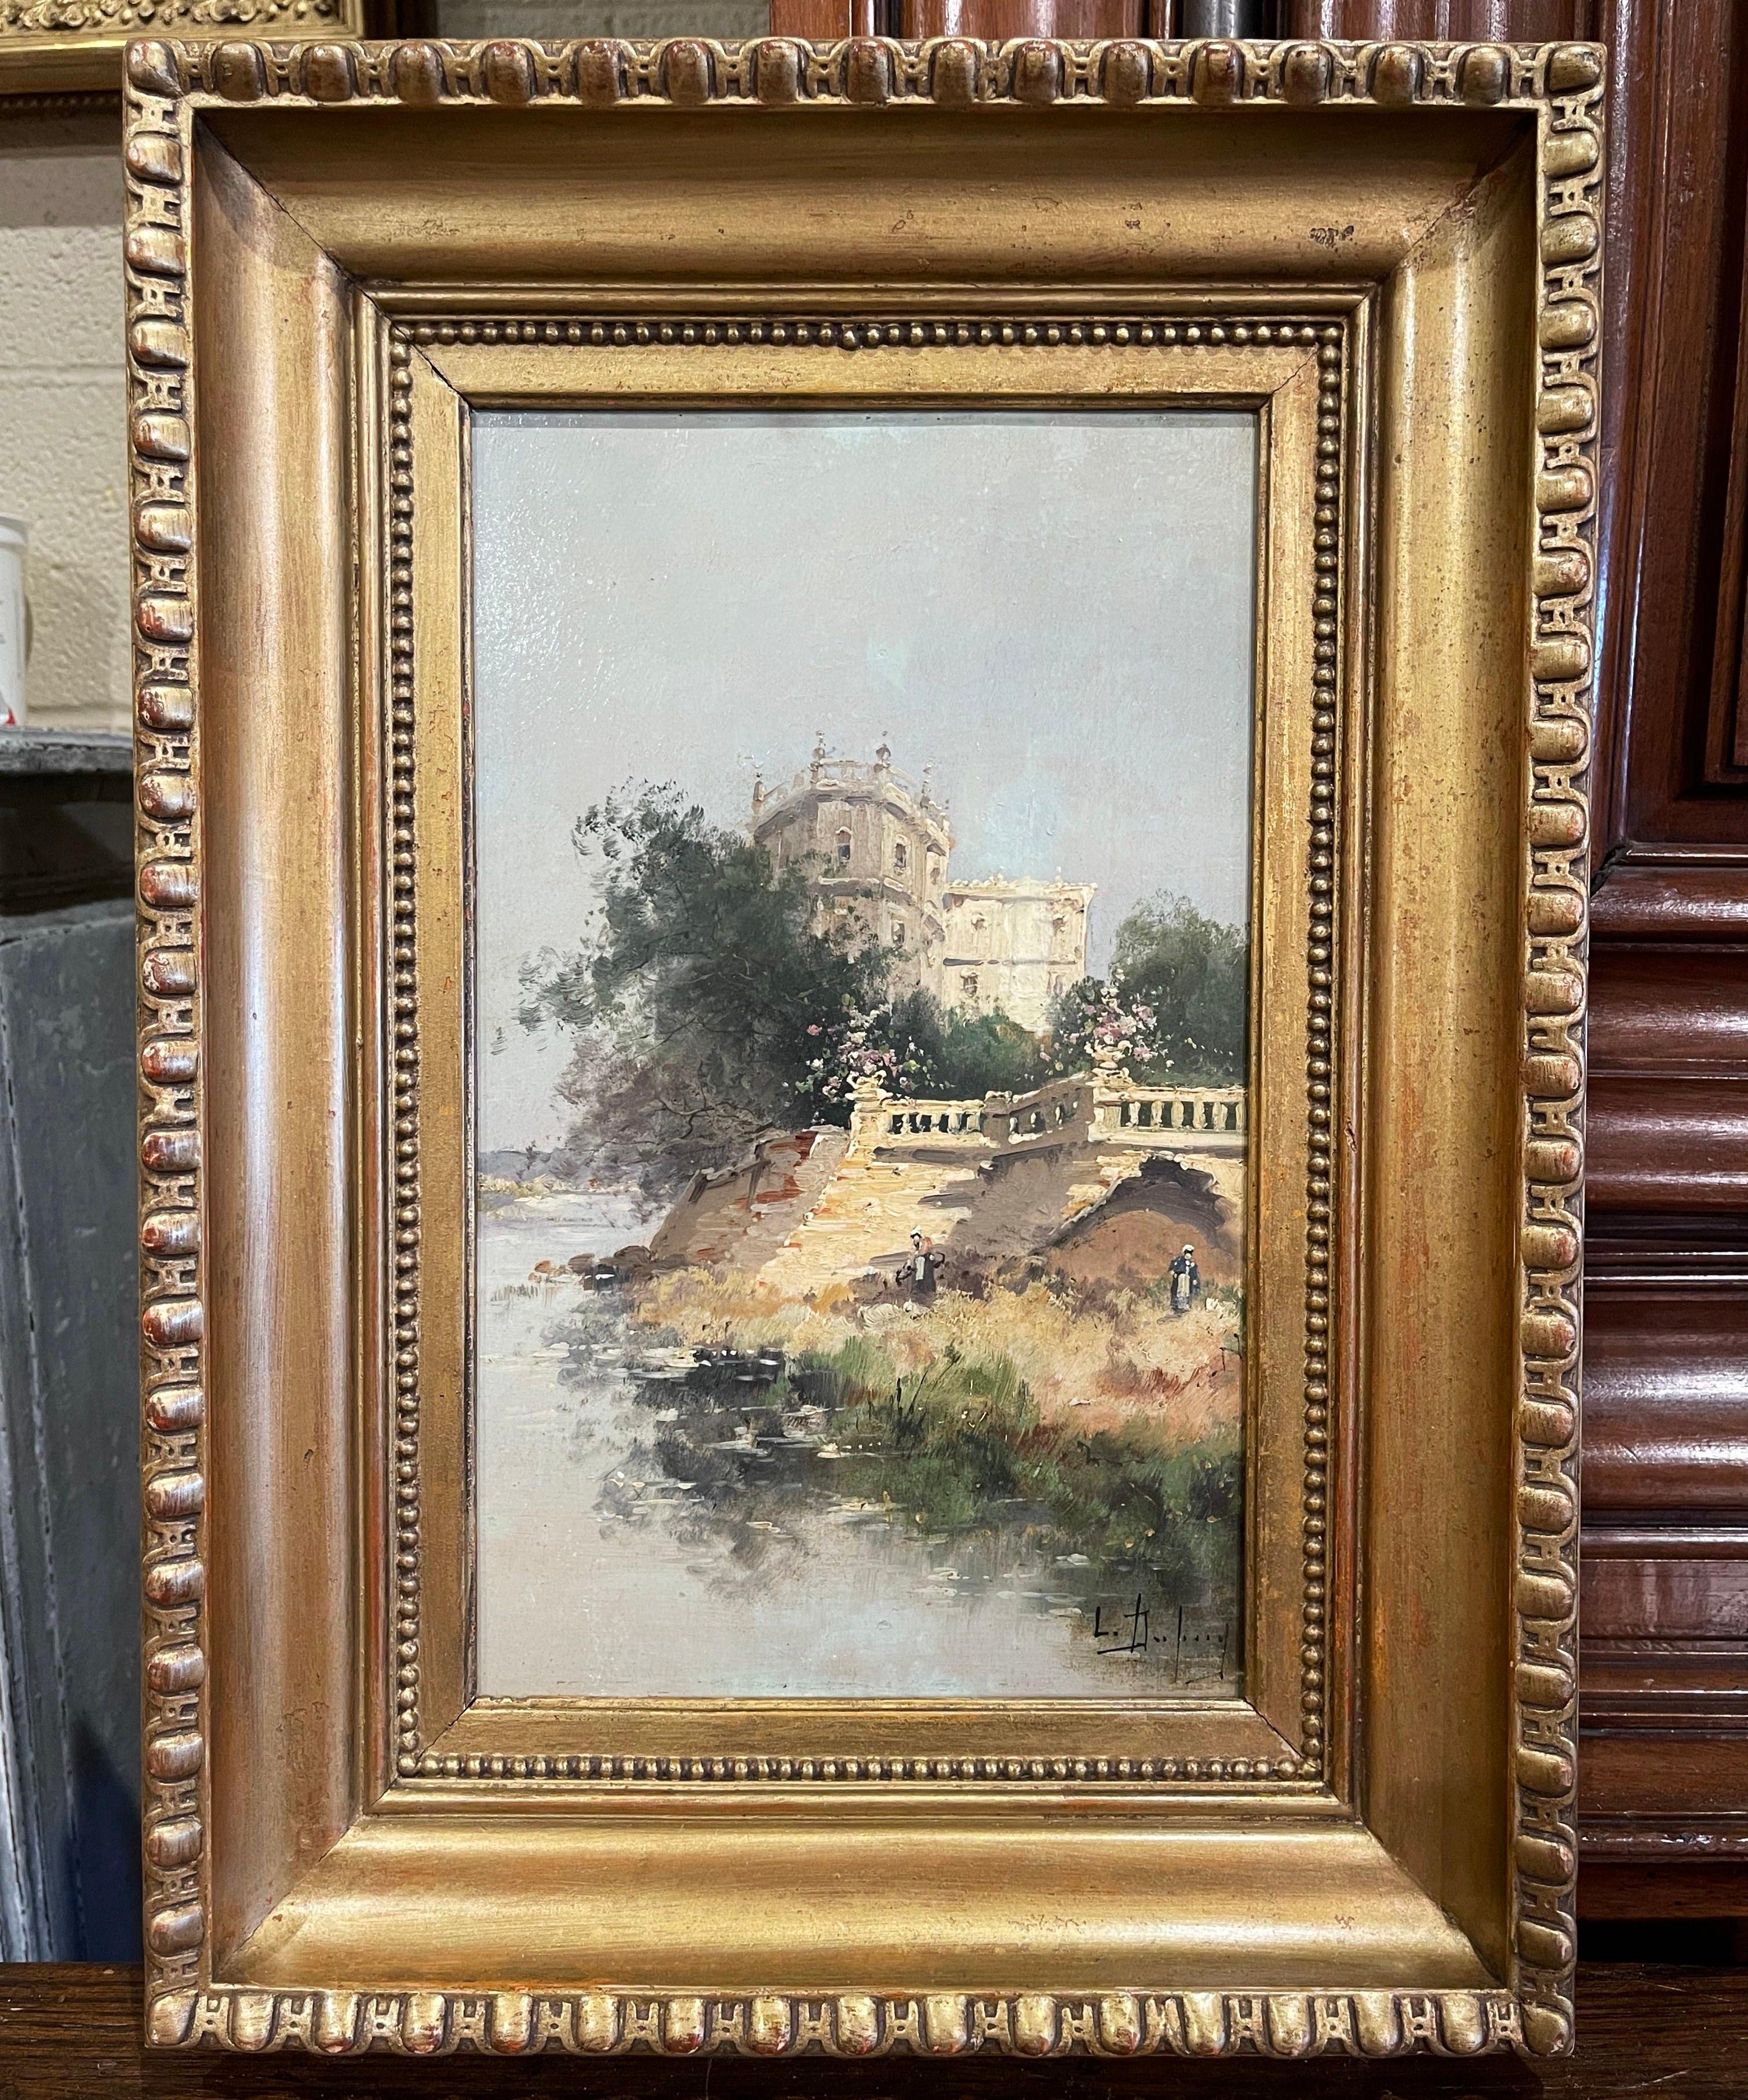 Giltwood 19th Century, Framed Landscape Painting Signed L. Dupuy for E. Galien-Laloue